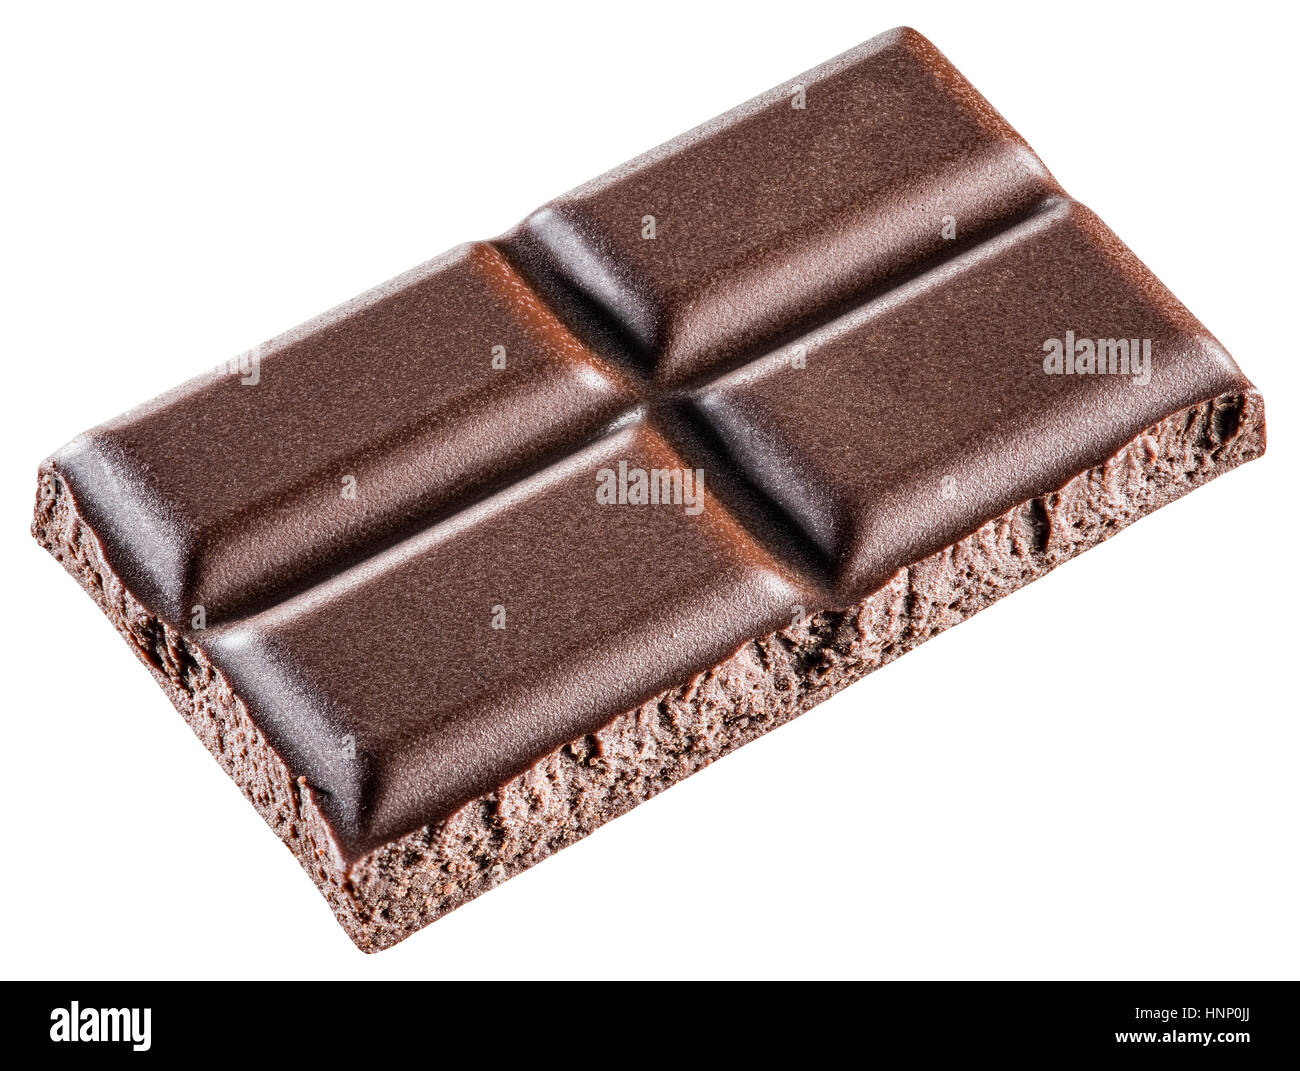 Pieces of chocolate bar. File contains clipping paths. Stock Photo